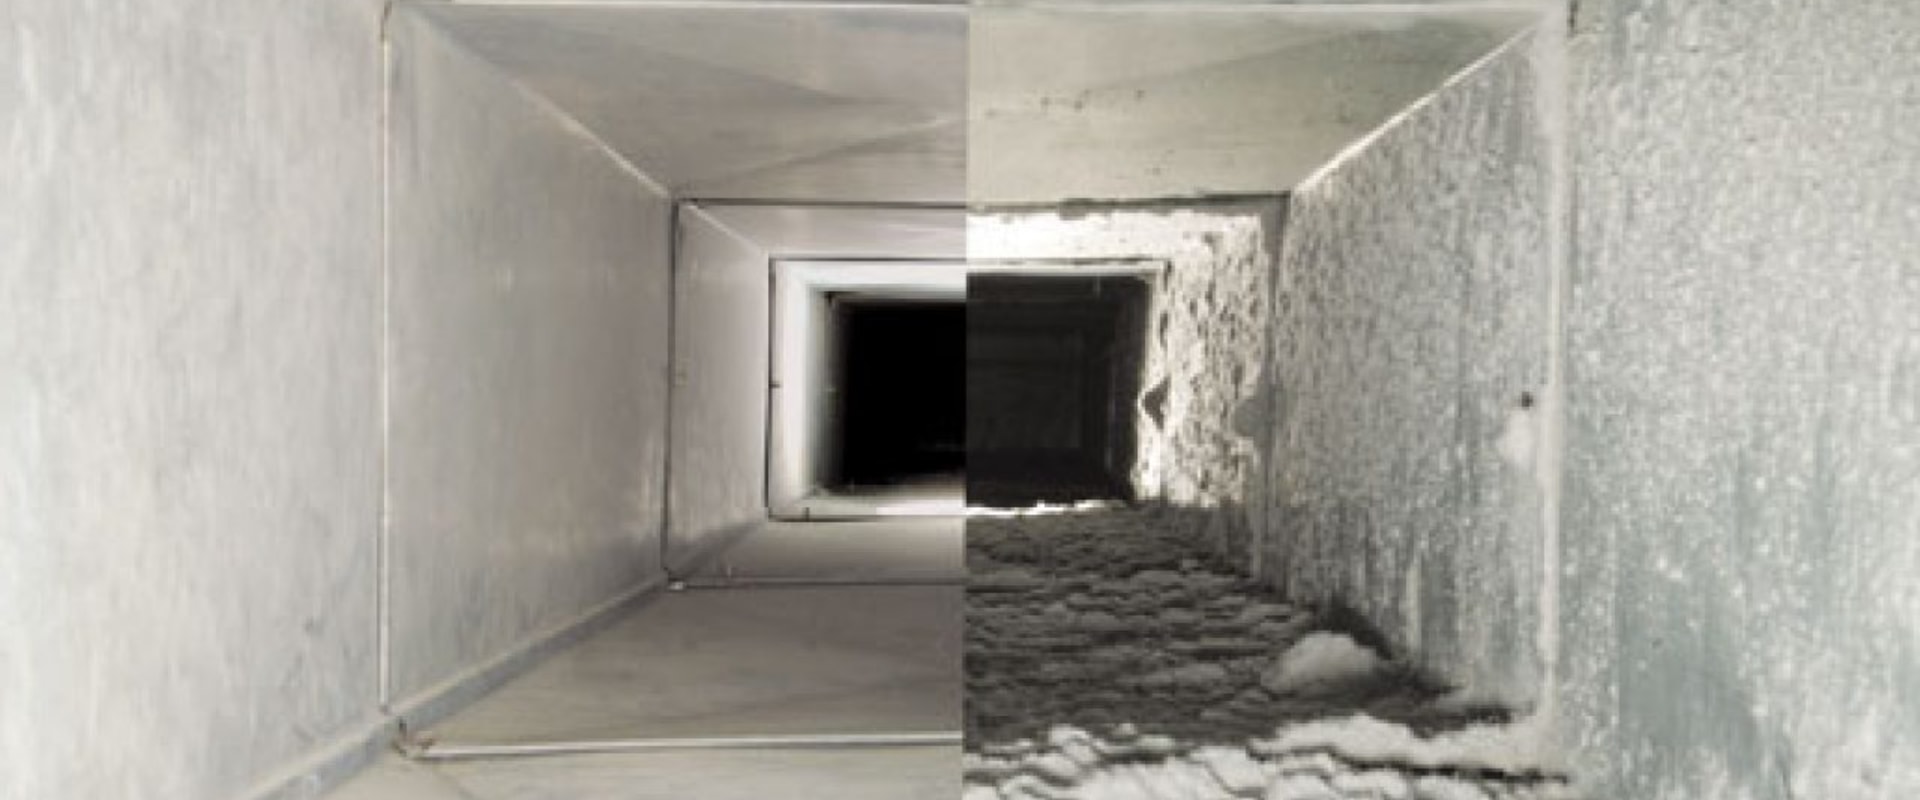 Does Duct Cleaning Remove Mold? - An Expert's Perspective